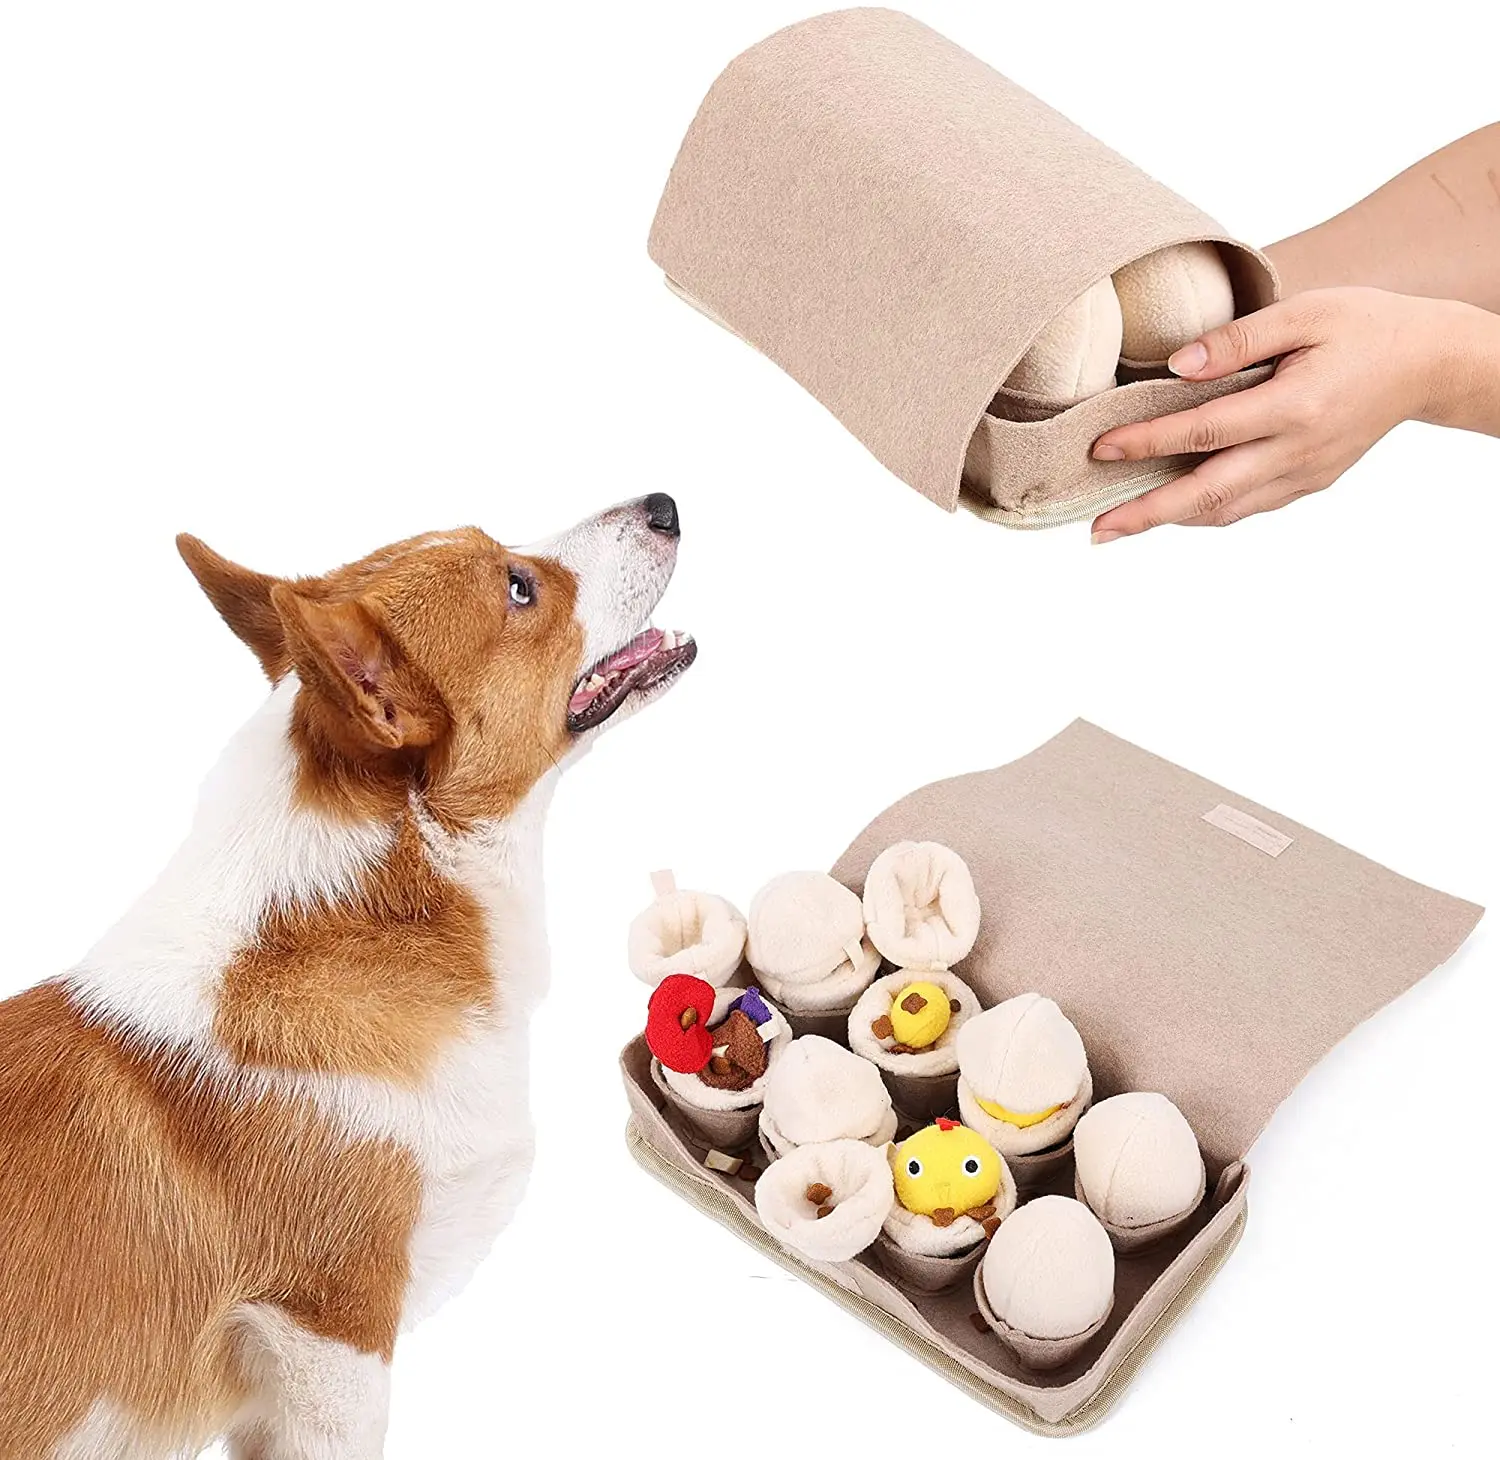 https://ae01.alicdn.com/kf/S106a6c2416ad4887ab596b5b1ce4e51fI/ATUBAN-Snuffle-Mat-for-Dogs-Slow-Feeding-Mat-Durable-Dog-Interactive-Mat-with-Squeaky-Puzzle-Toys.jpg